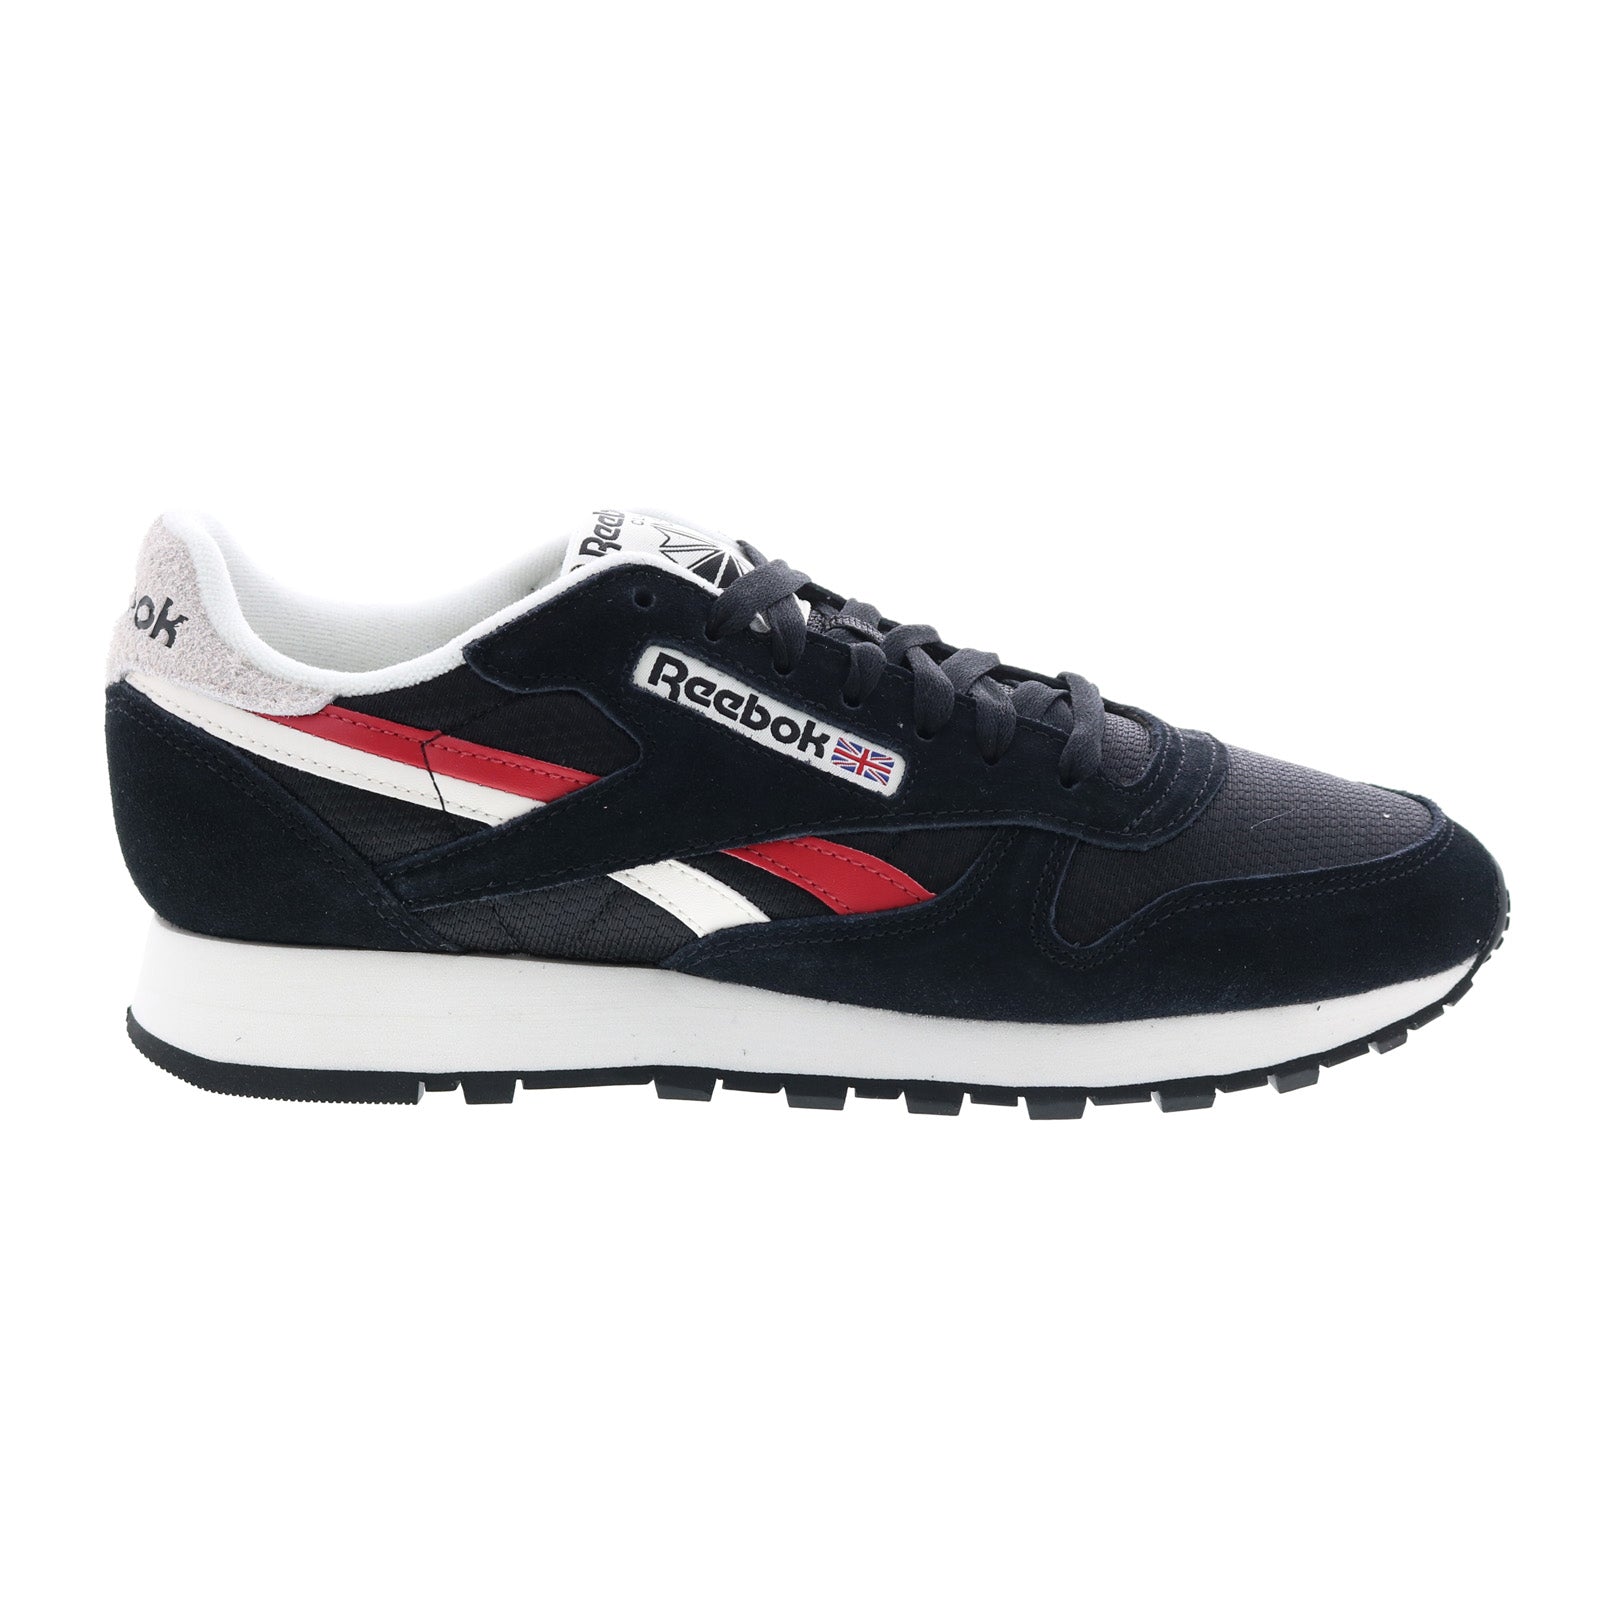 Reebok Classic Leather GY7303 Mens Black Suede Lifestyle Sneakers Shoe ...